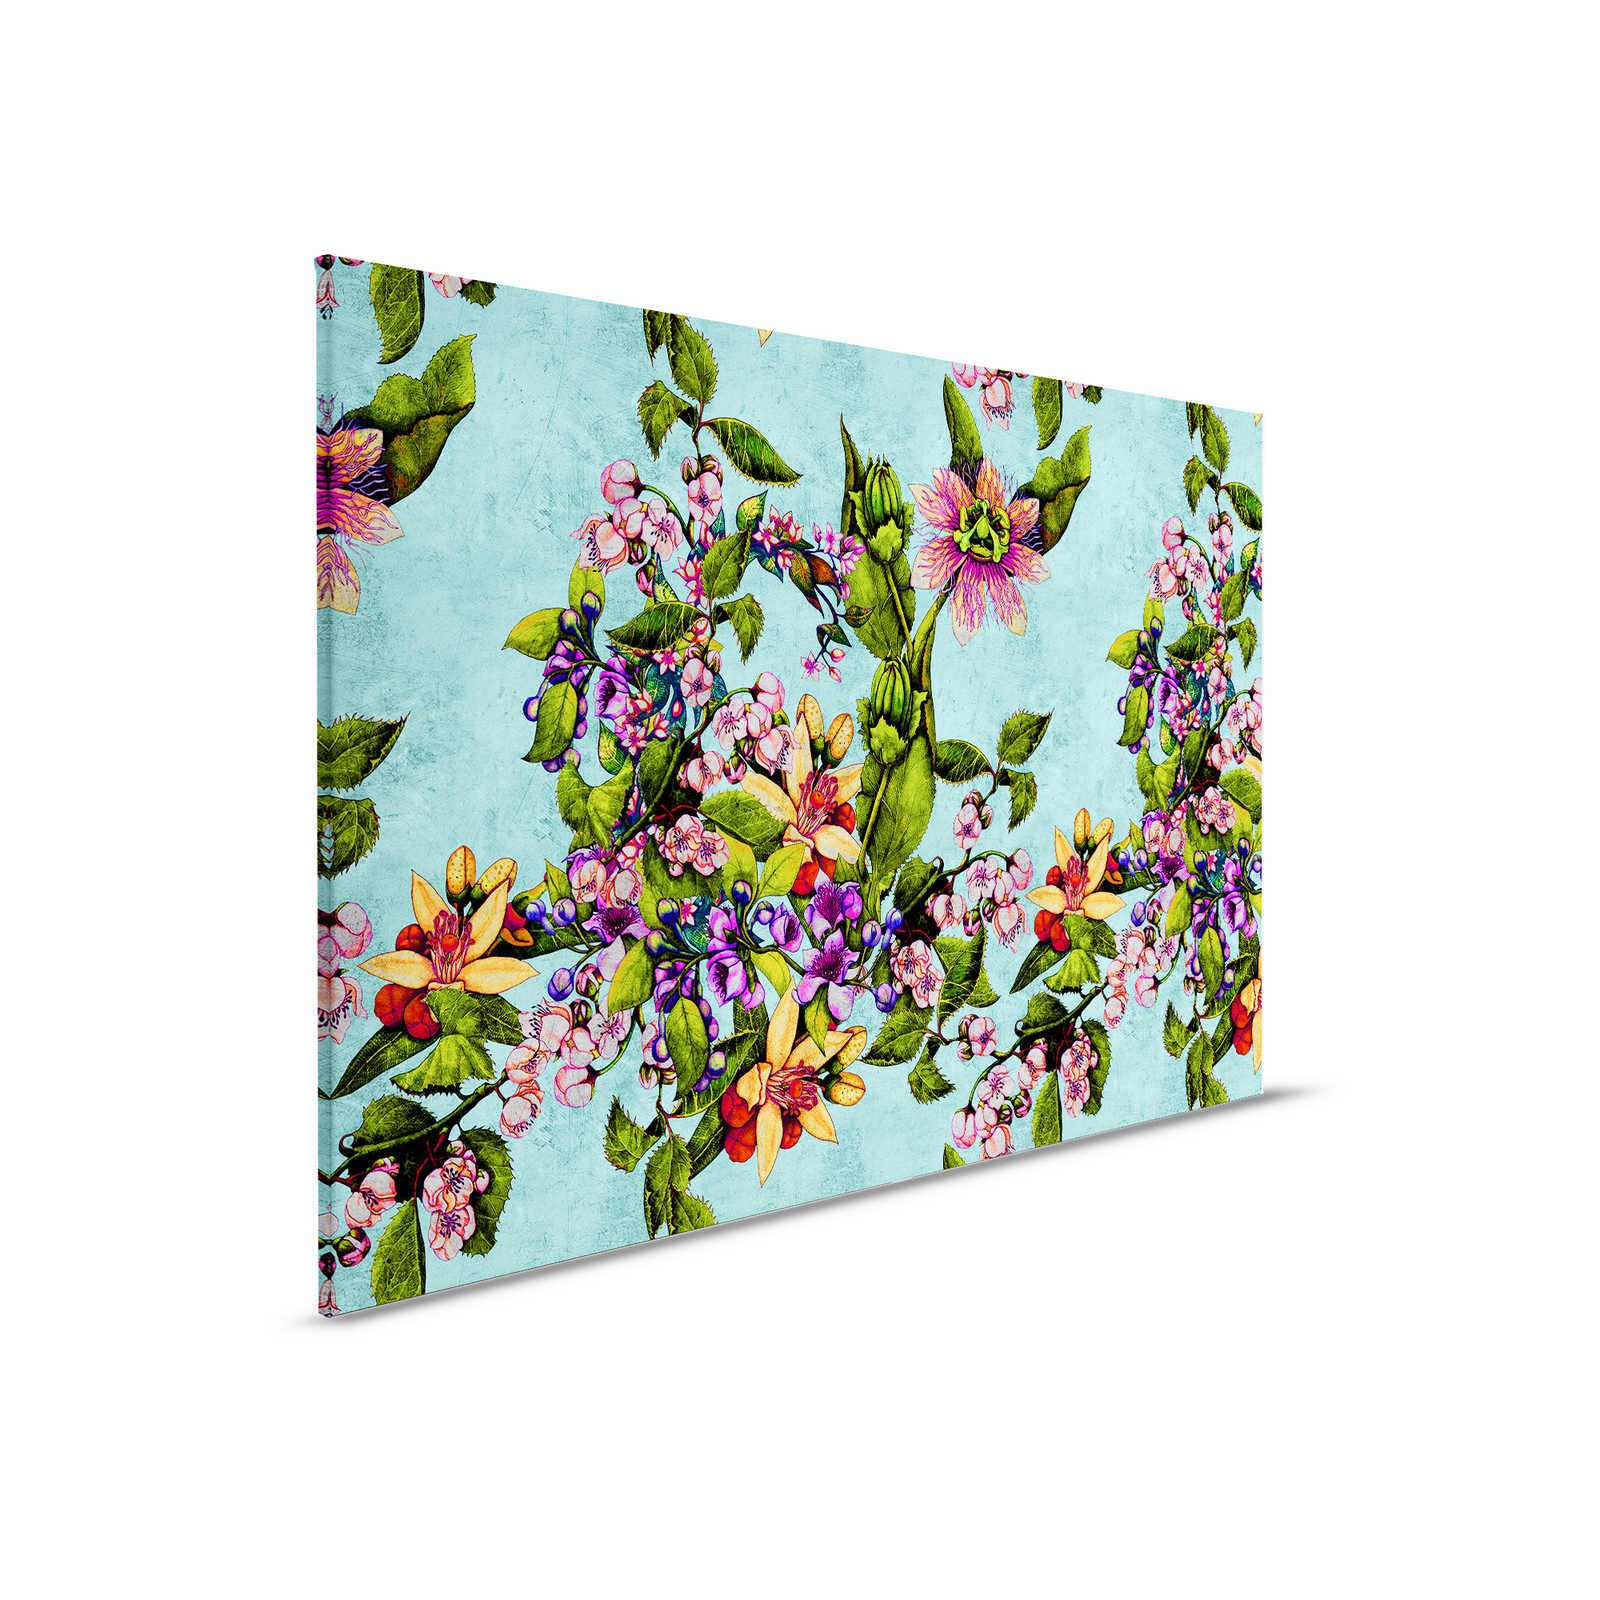 Tropical Passion 1 - Tropical Canvas Painting with Floral Pattern - 0.90 m x 0.60 m
